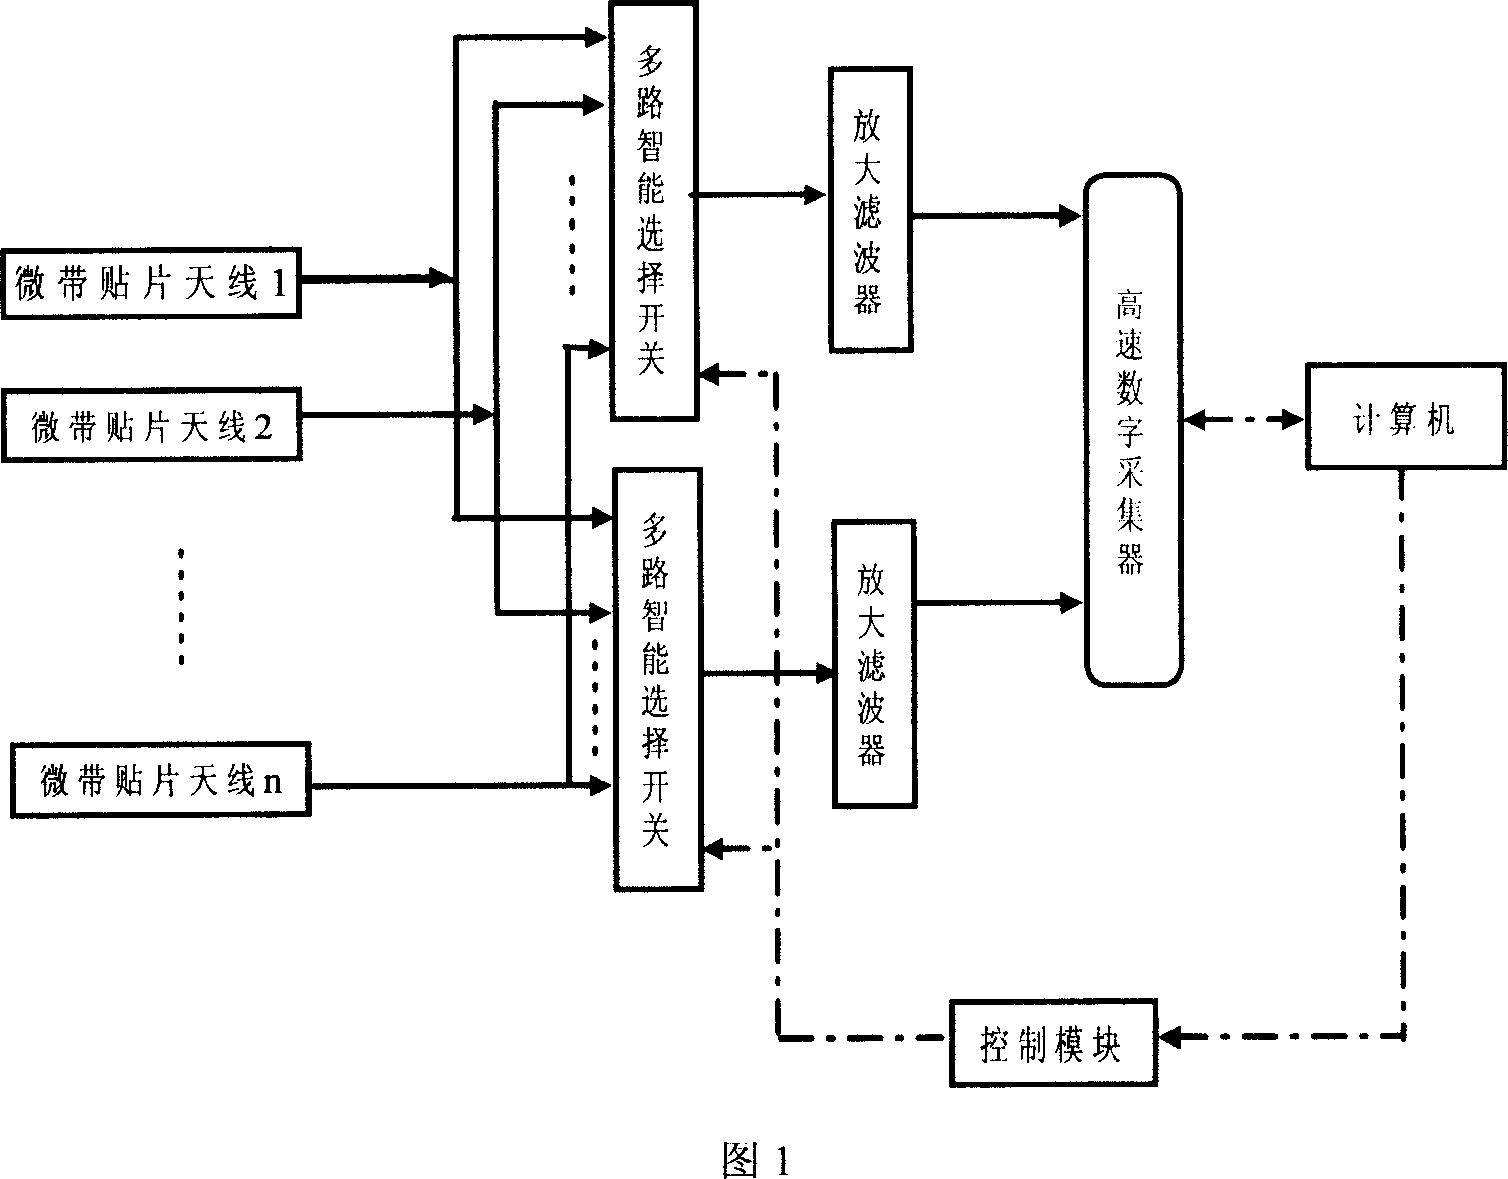 Virtual instrument technique based gas insulation combined electric appliances online detecting method